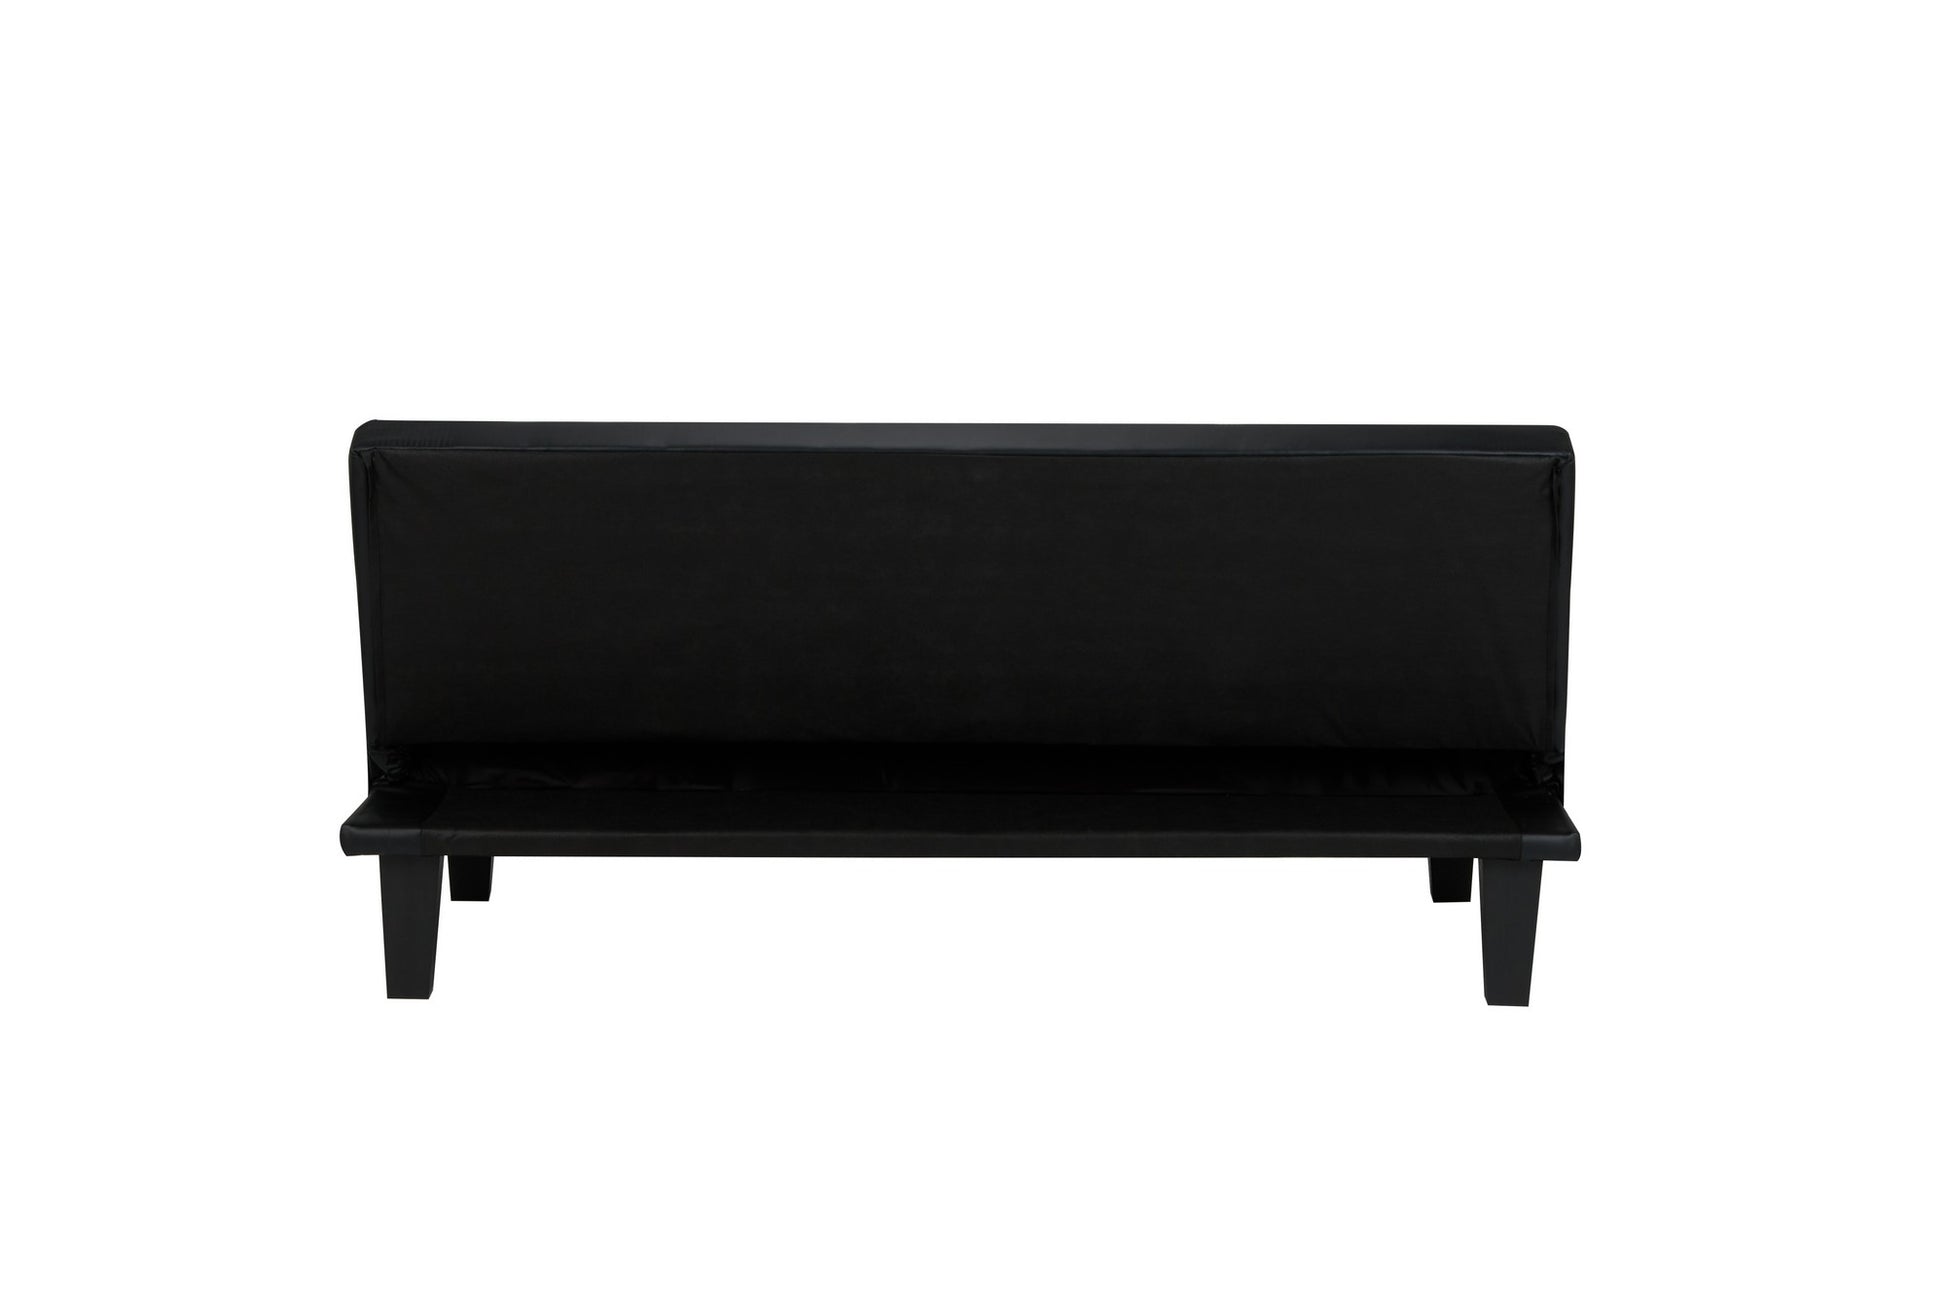 Franklin Sofa Bed - Classic Contemporary Design, Eucalyptus Wood Frame, Comfortable Foam Filling, Faux Leather Upholstery